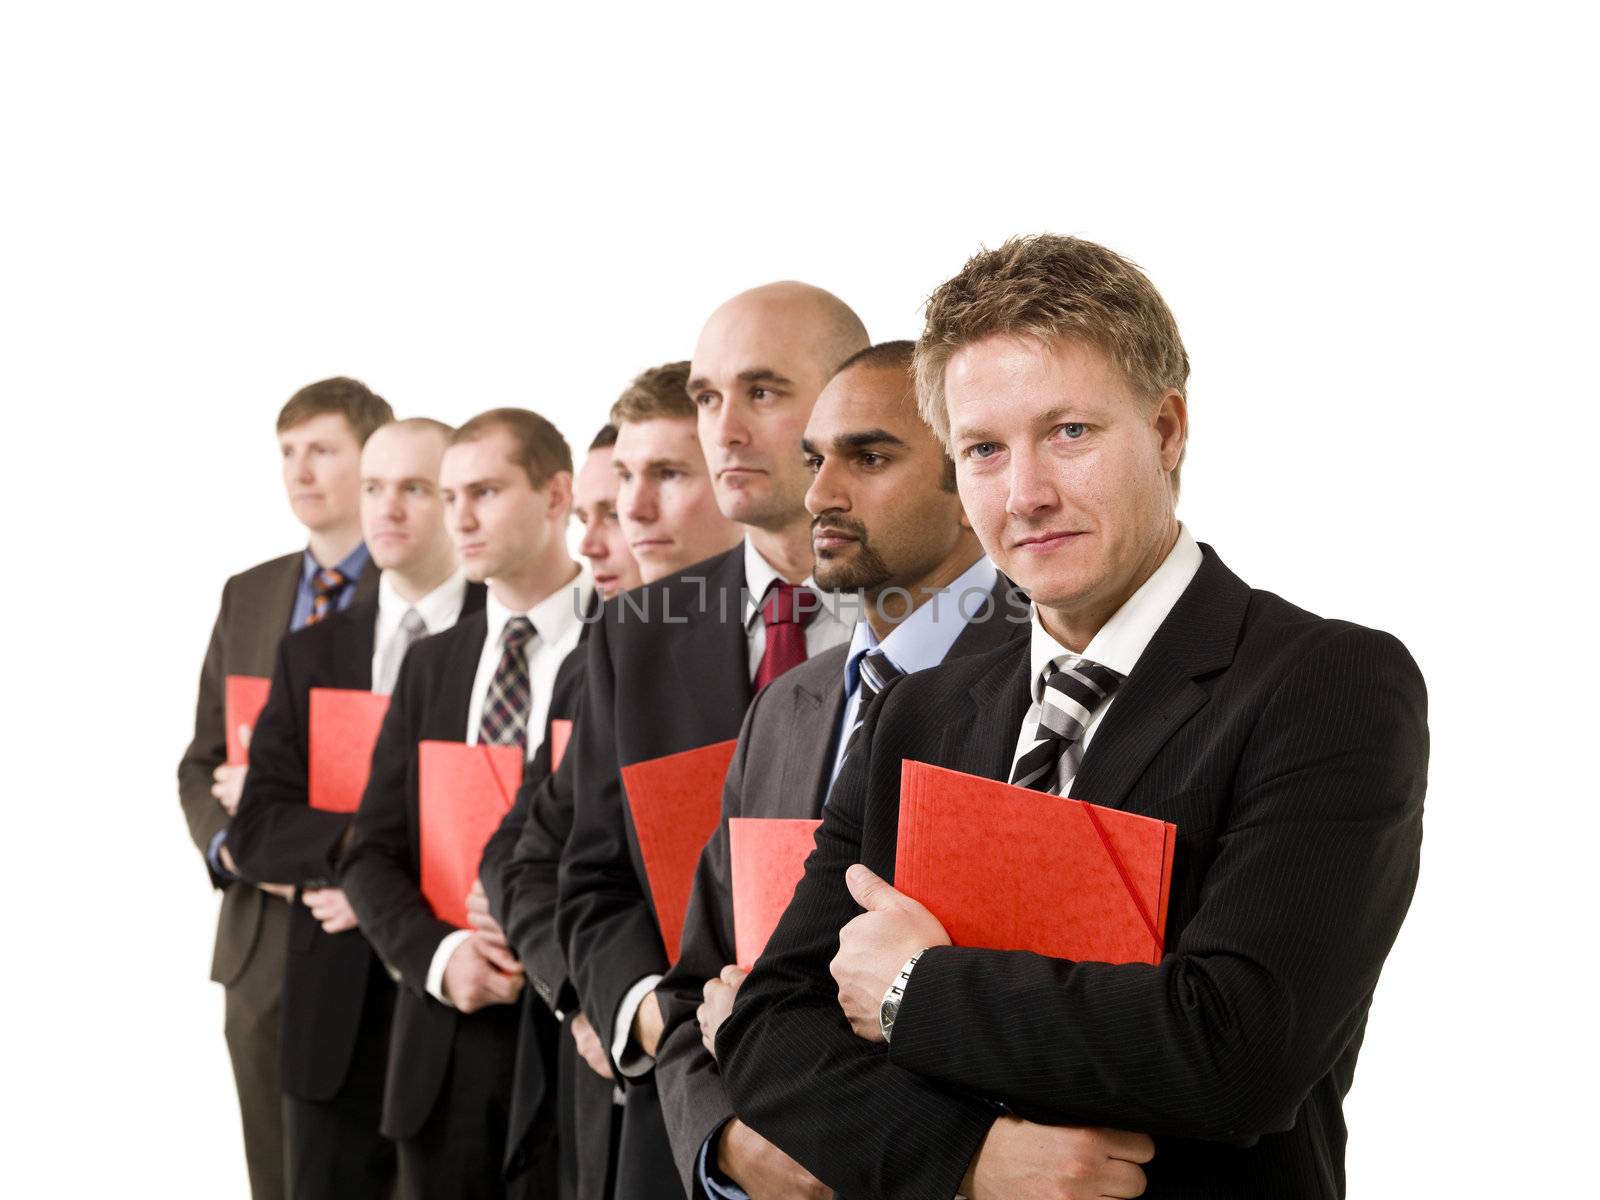 Group of business men with red documents isolated on white background